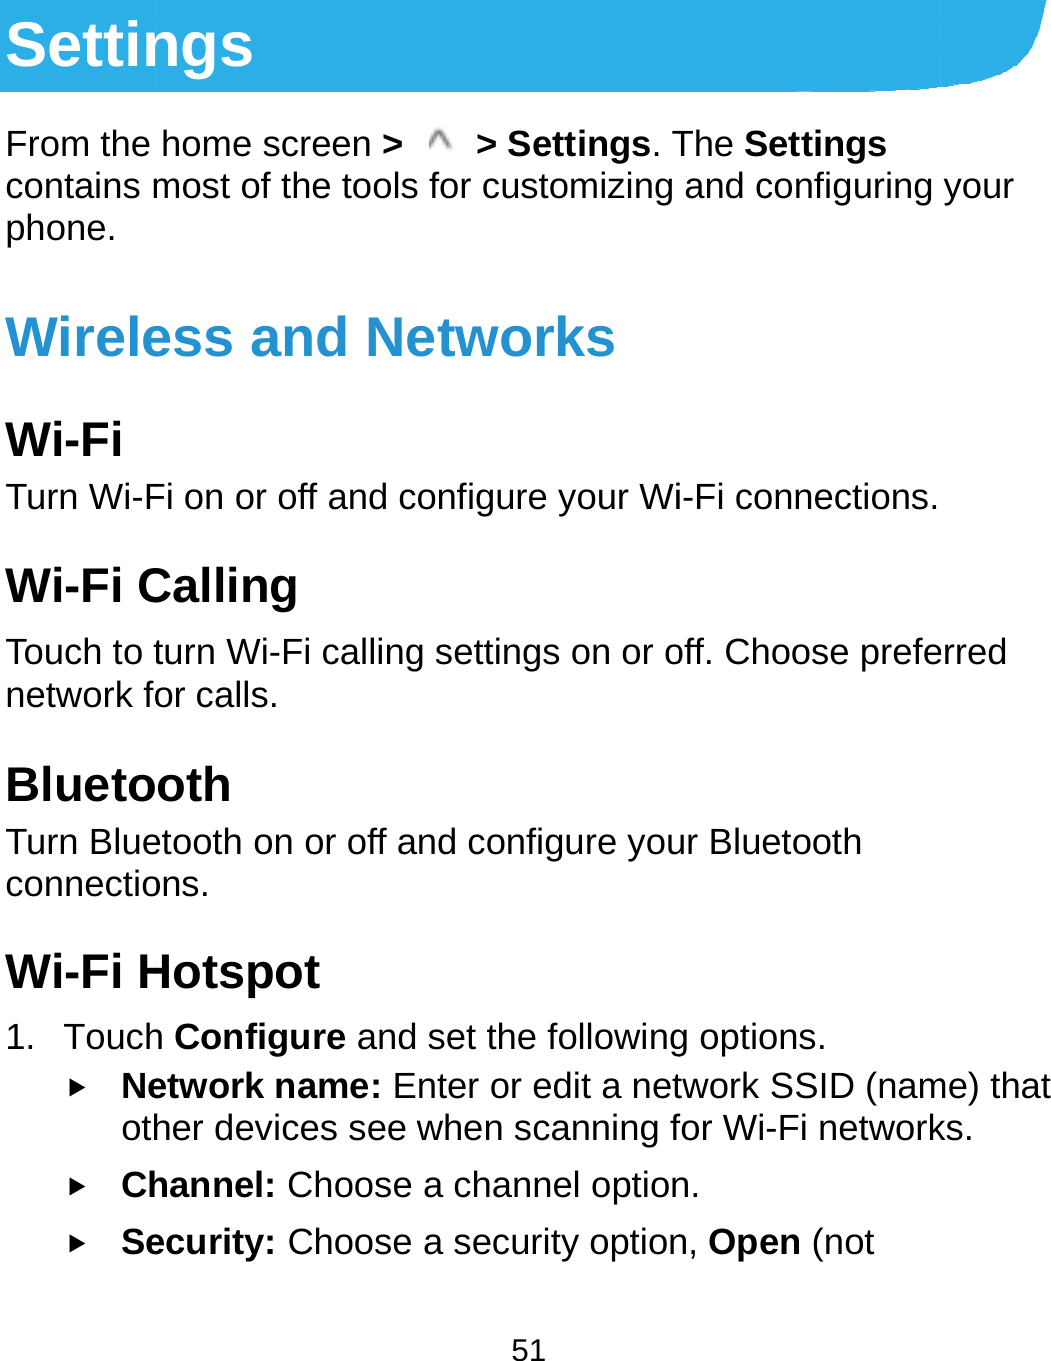 SettinFrom the contains mphone.  WireleWi-Fi Turn Wi-FWi-Fi CTouch to tnetwork foBluetoTurn BlueconnectioWi-Fi H1. Touch Neoth Ch Sengs home screen &gt; most of the toolsess and NeFi on or off and cCalling turn Wi-Fi callingor calls. oth etooth on or off aons.  Hotspot h Configure and etwork name: Eher devices see whannel: Choose ecurity: Choose  51  &gt; Settings. T for customizing etworks onfigure your Wig settings on or ond configure youset the followingnter or edit a netwhen scanning fa channel optiona security optionThe Settings and configuring i-Fi connections. off. Choose prefeur Bluetooth g options. twork SSID (namfor Wi-Fi networkn. n, Open (not your  erred me) that ks. 